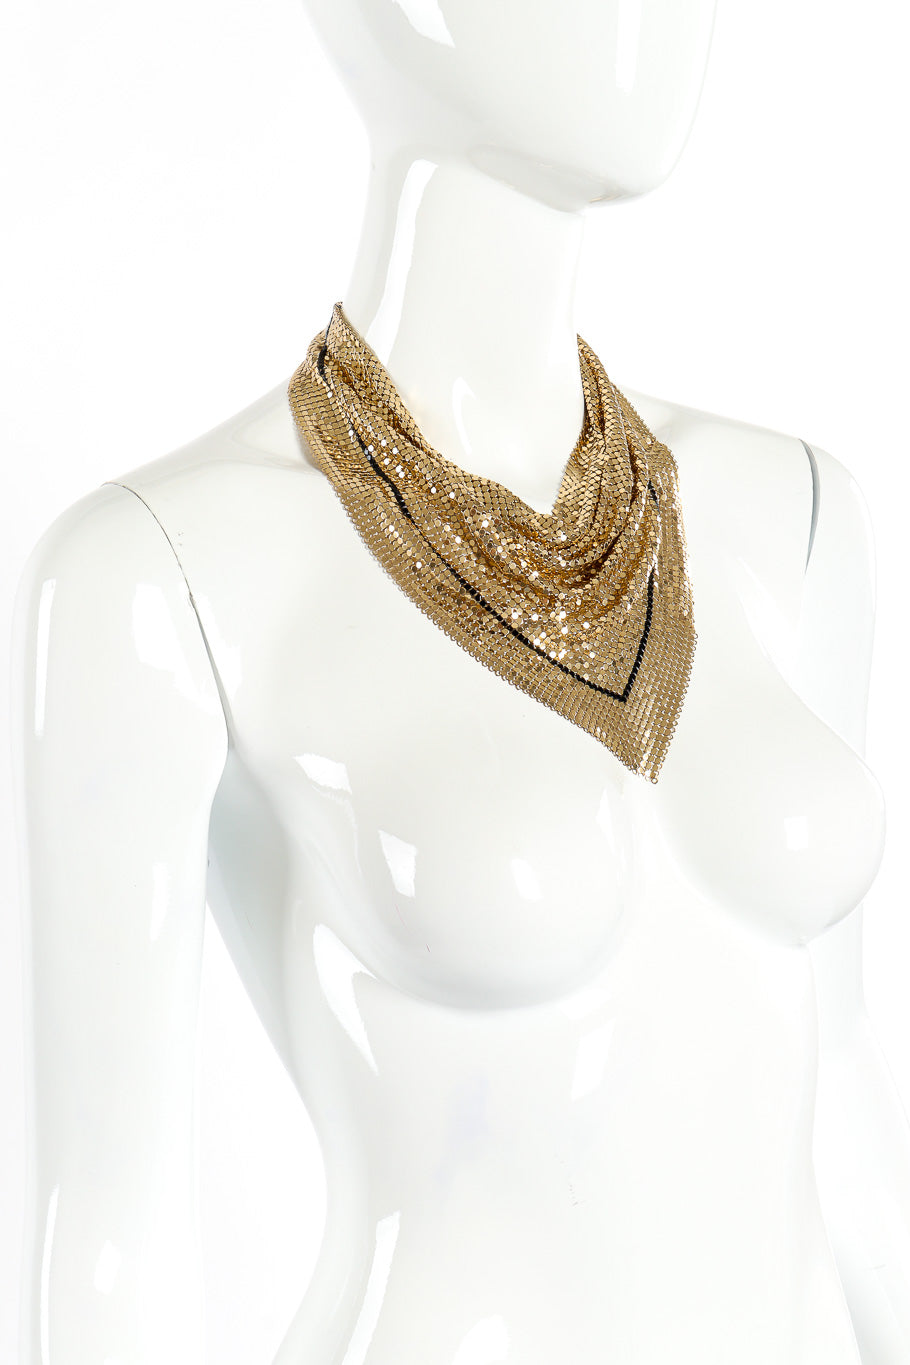 Chain mesh necklace by Whiting & Davis on white background on mannequin neck side close @recessla